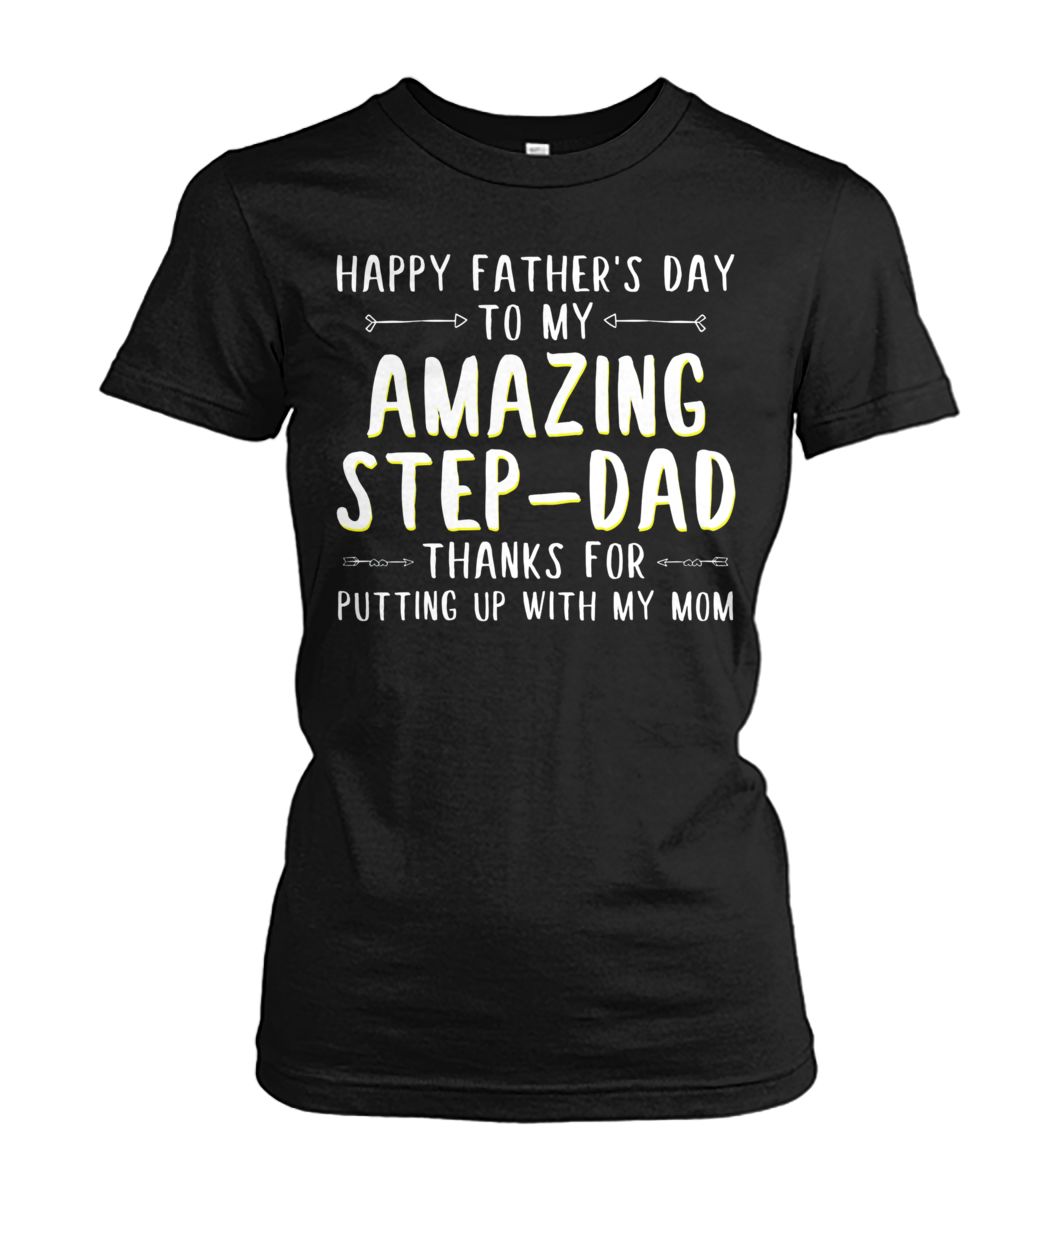 Happy father's day to my amazing step-dad thanks for putting up with my mom women's crew tee